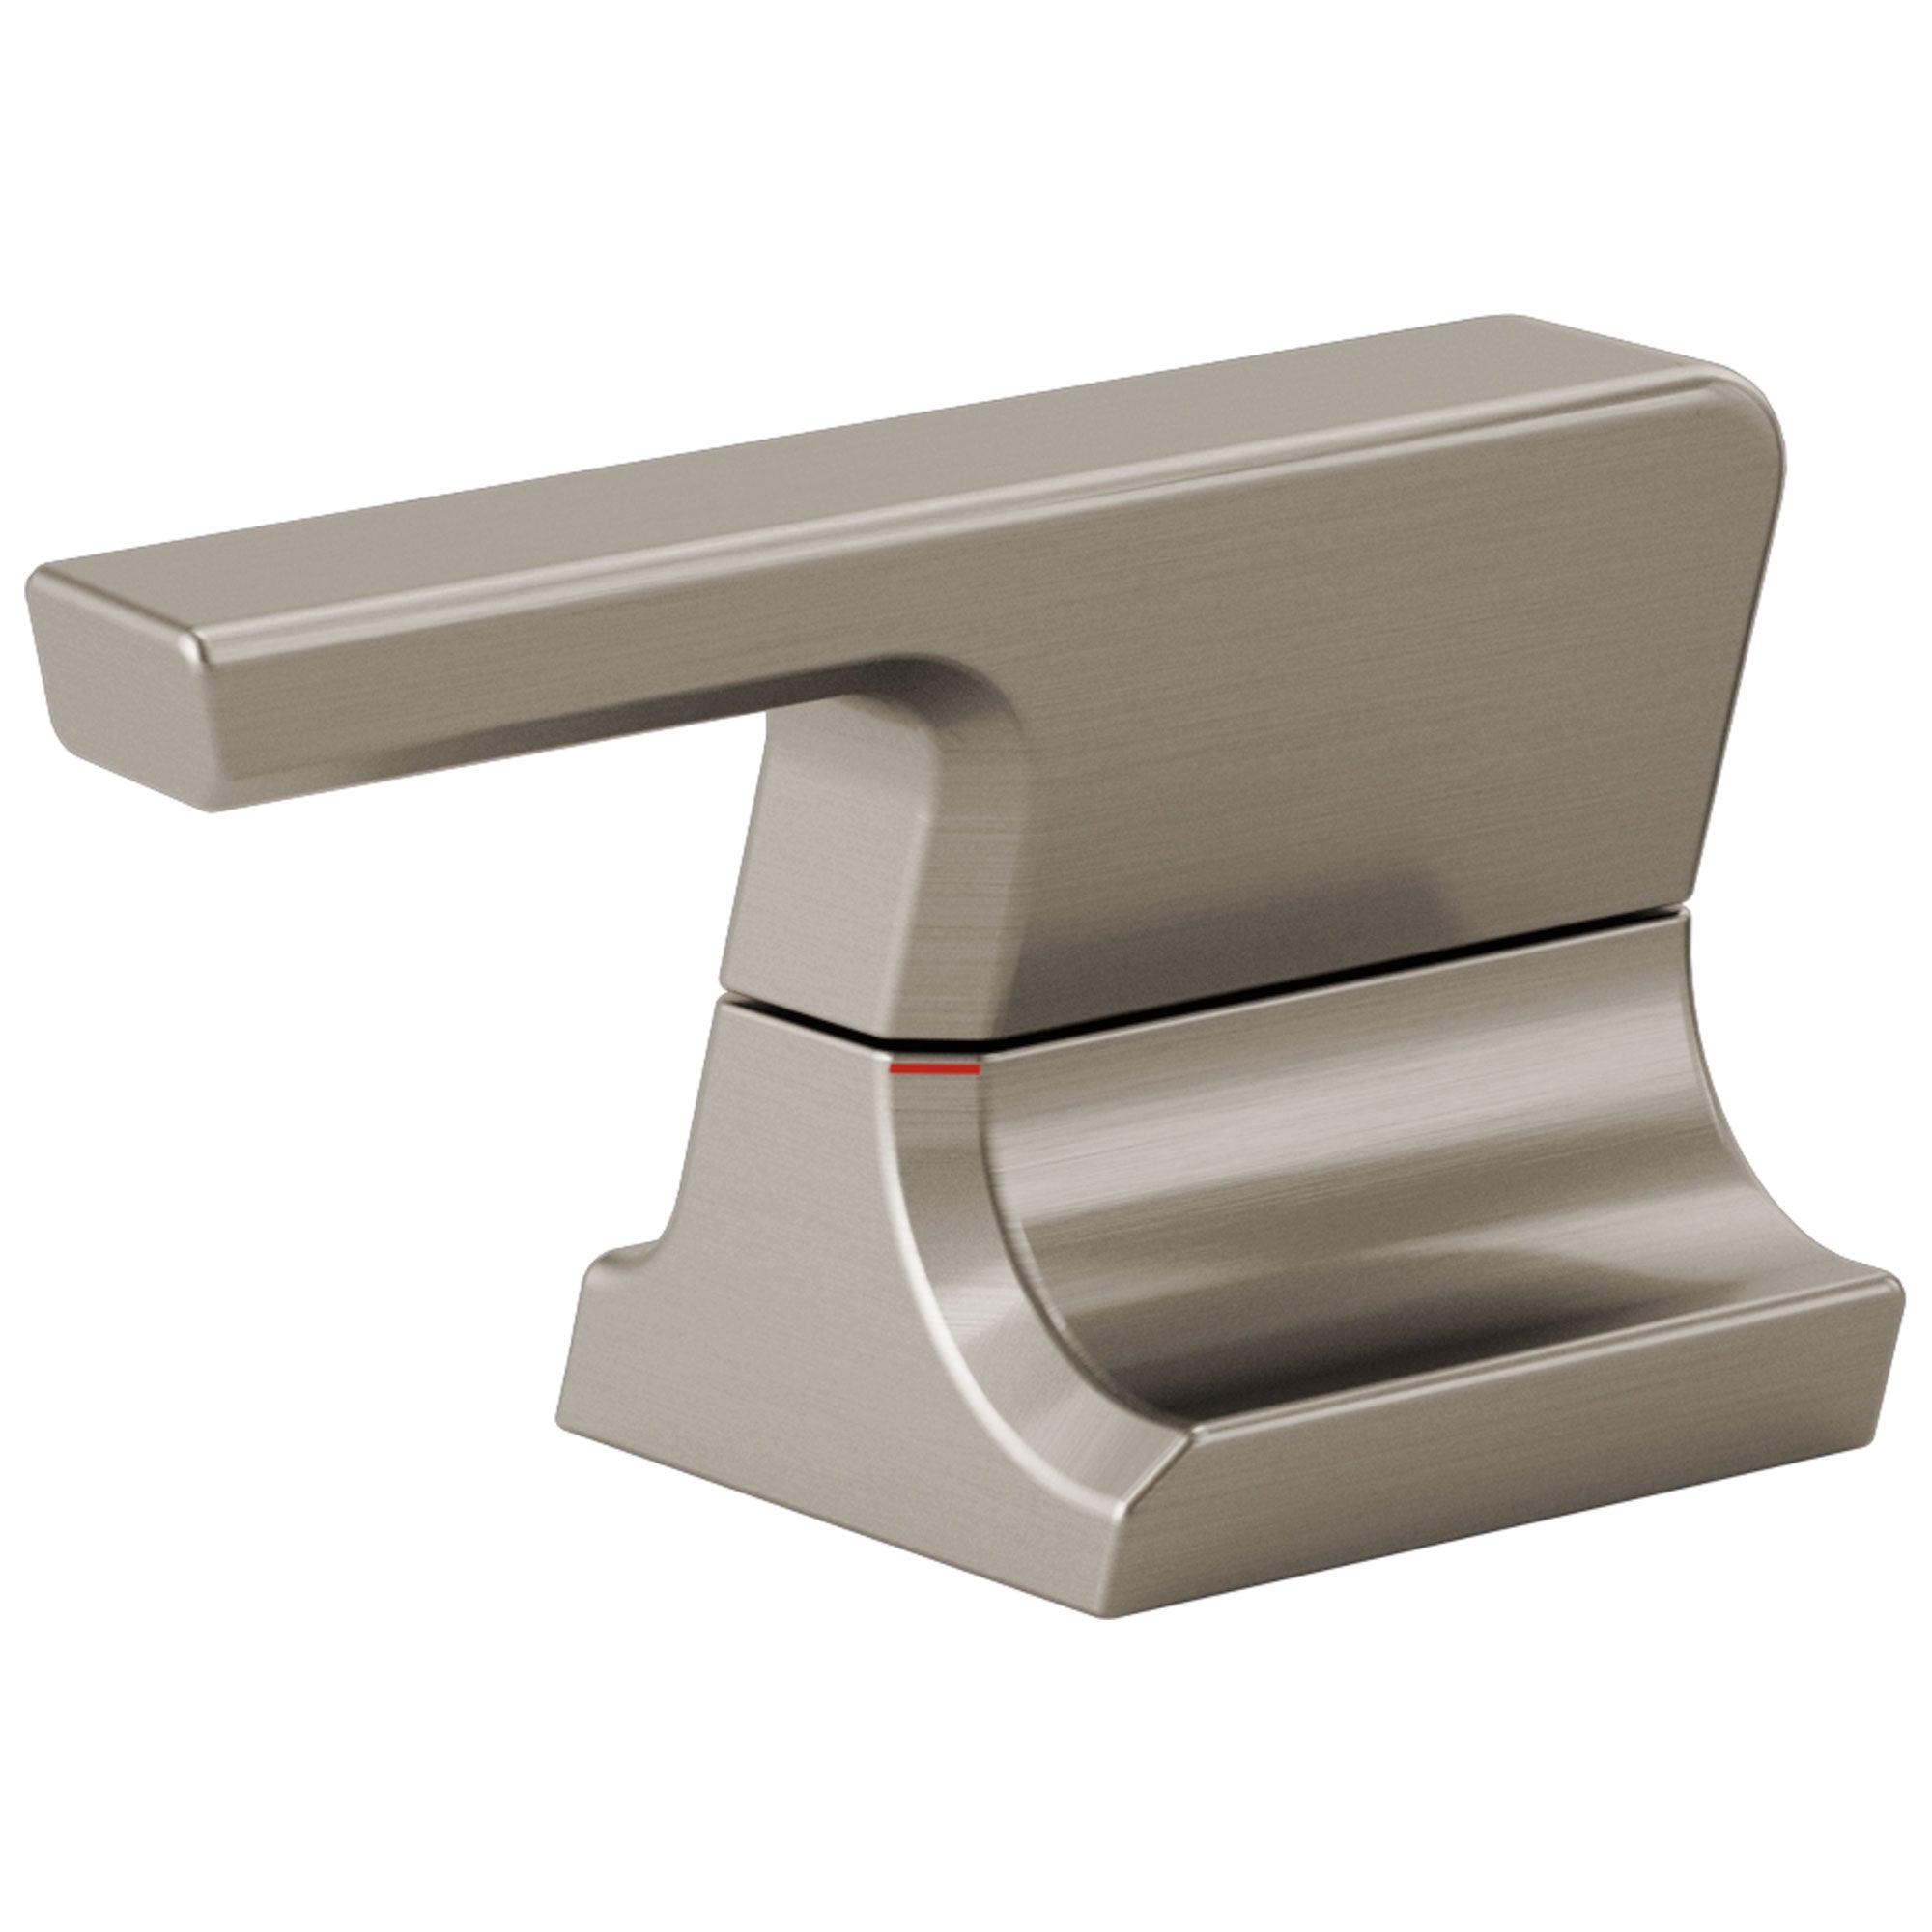 Delta Pivotal Stainless Steel Finish Metal Bathroom Faucet Lever Handle Set DH299SS